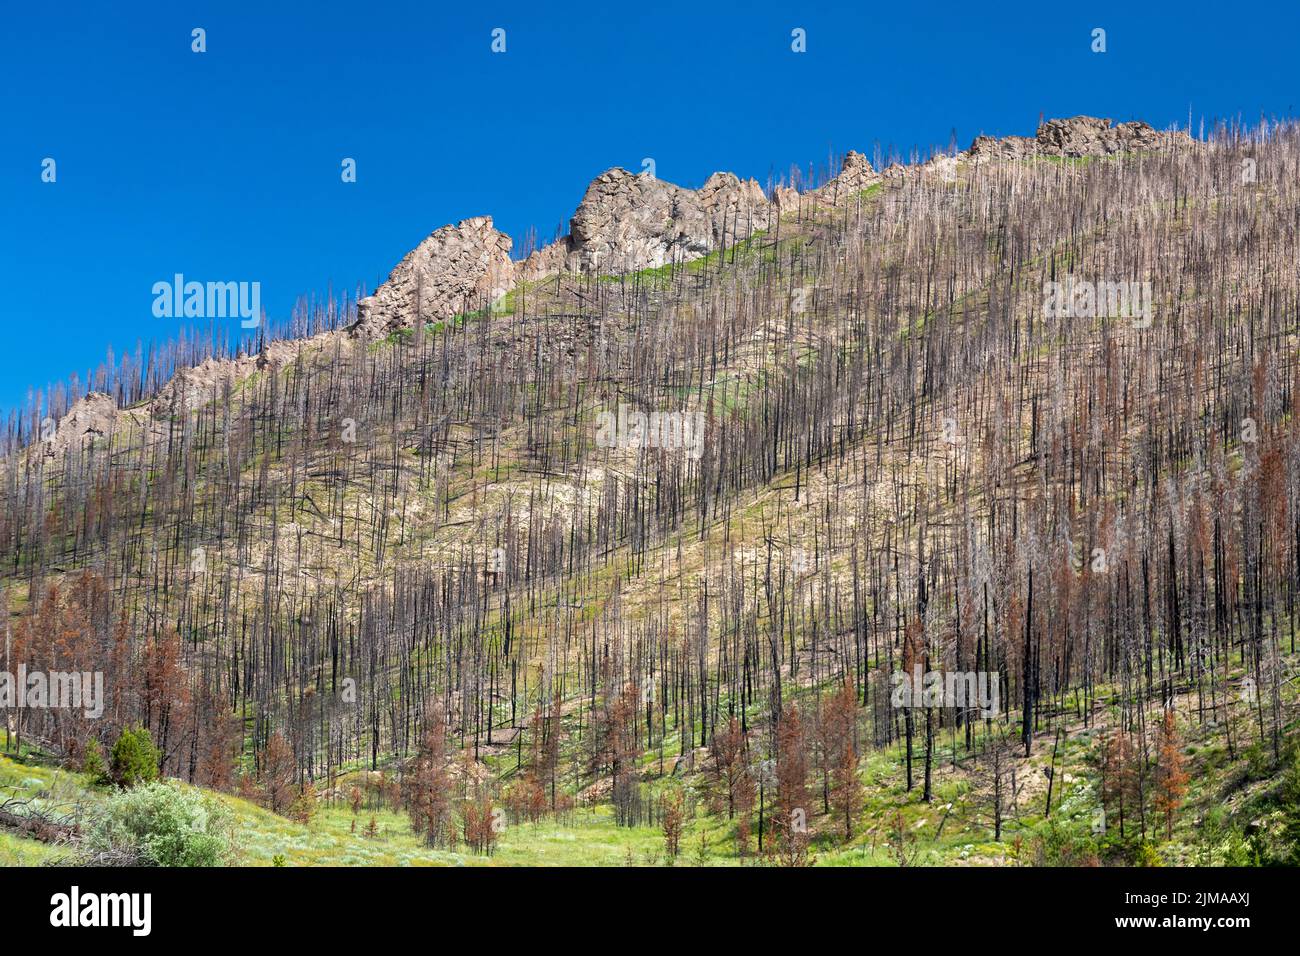 Grand County, Colorado - The aftermath of the East Troublesome Fire. The fire was one of the largest in Colorado's history, burning nearly 200,000 acr Stock Photo